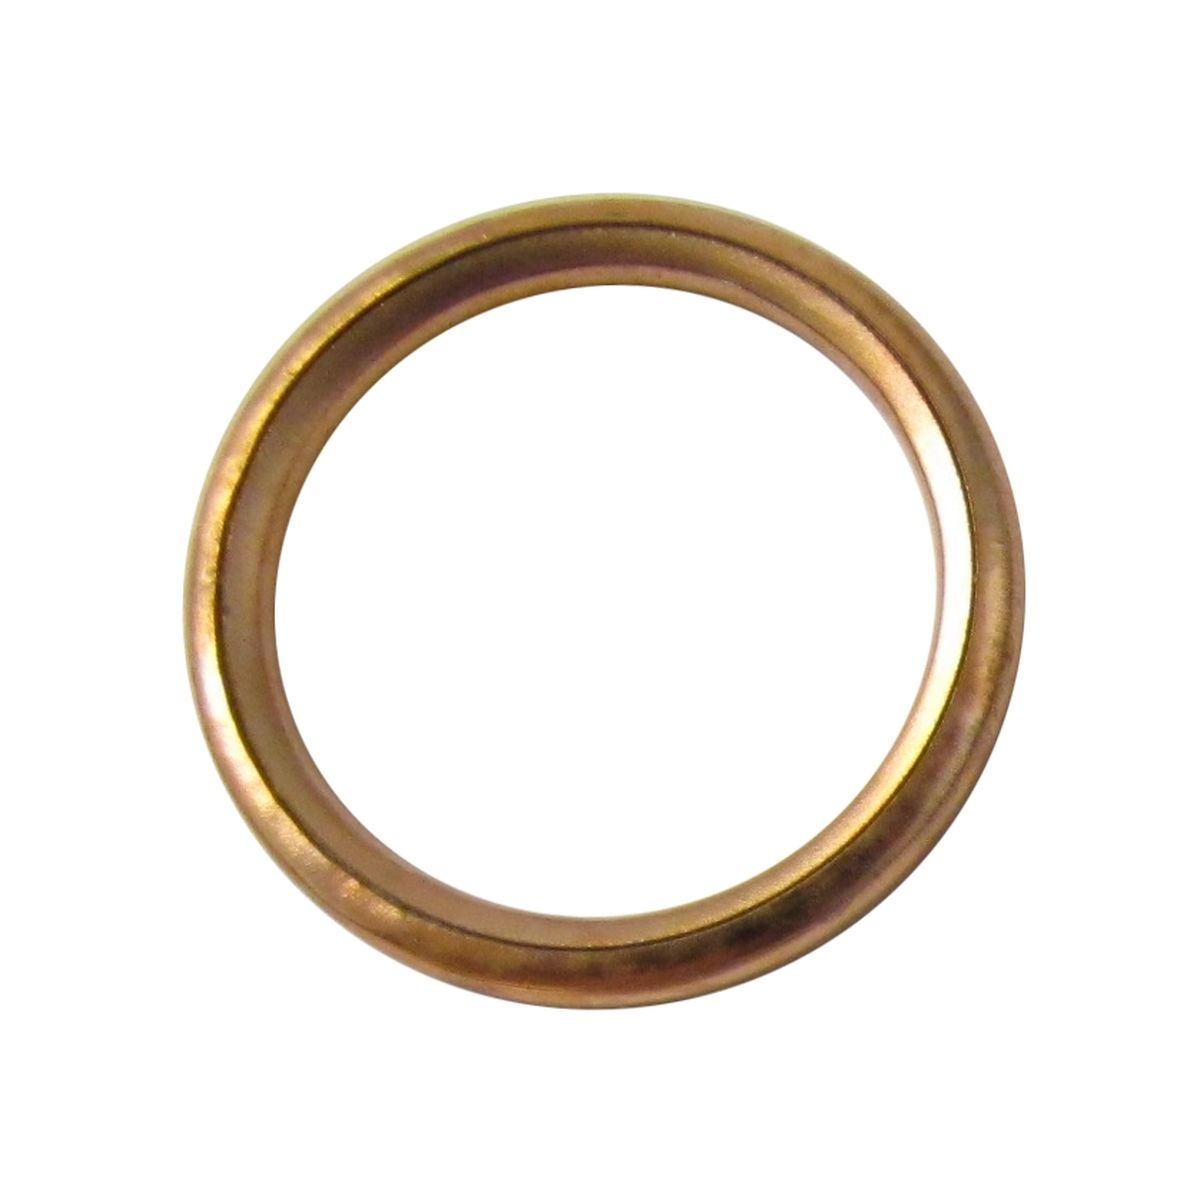 Exhaust Gasket Copper 1 for 1997 F12 Challenge the lowest store price 2T Phantom 50cc Malaguti